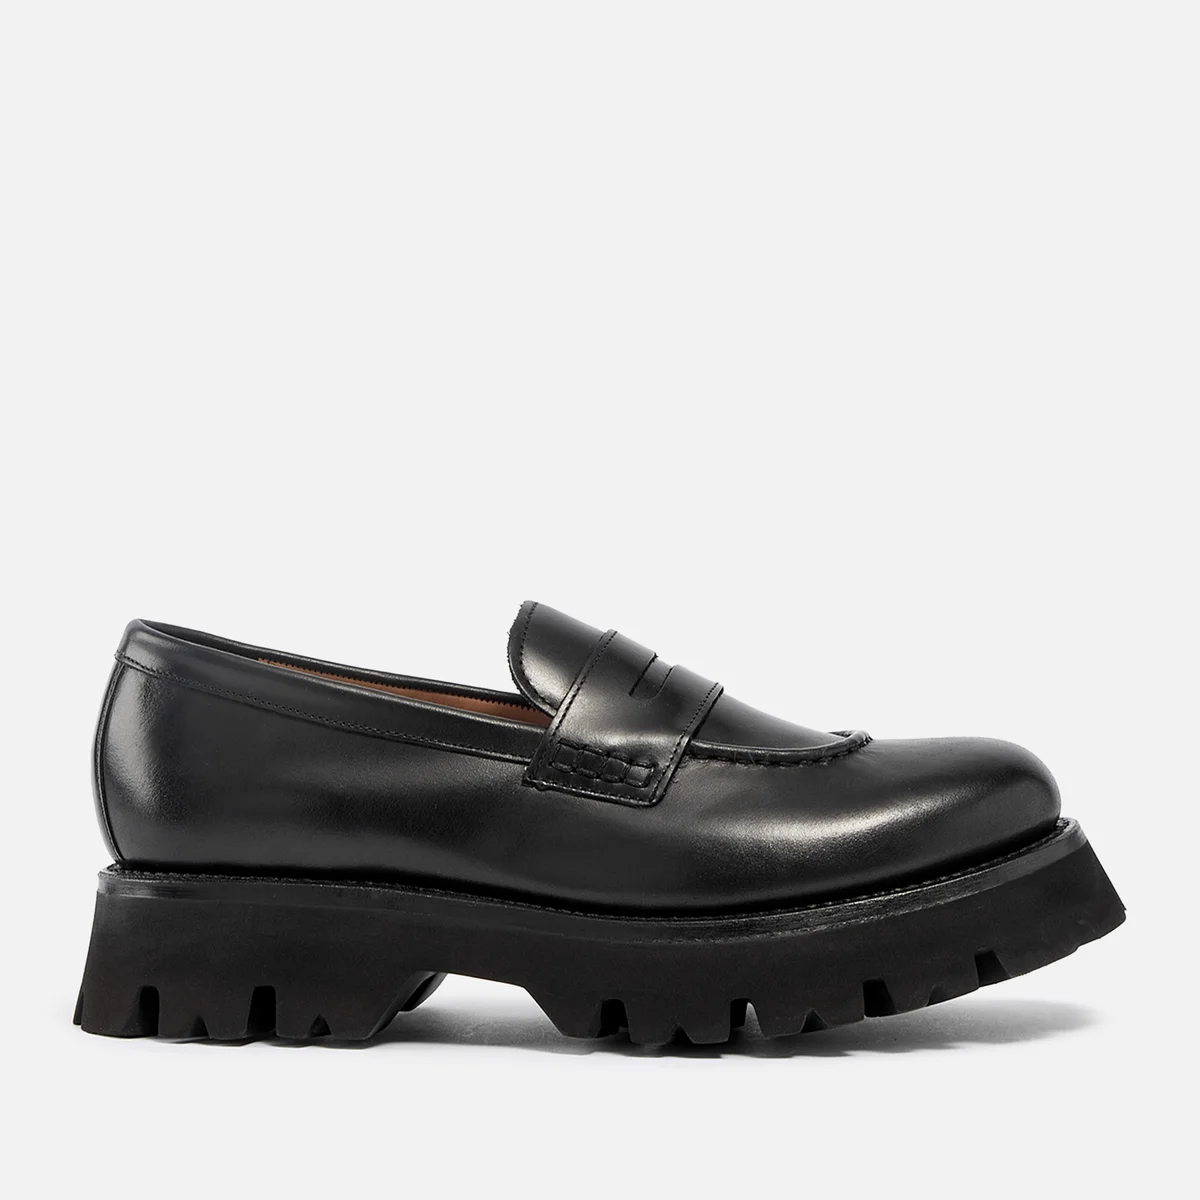 Grenson Hattie Leather Loafers Image 1